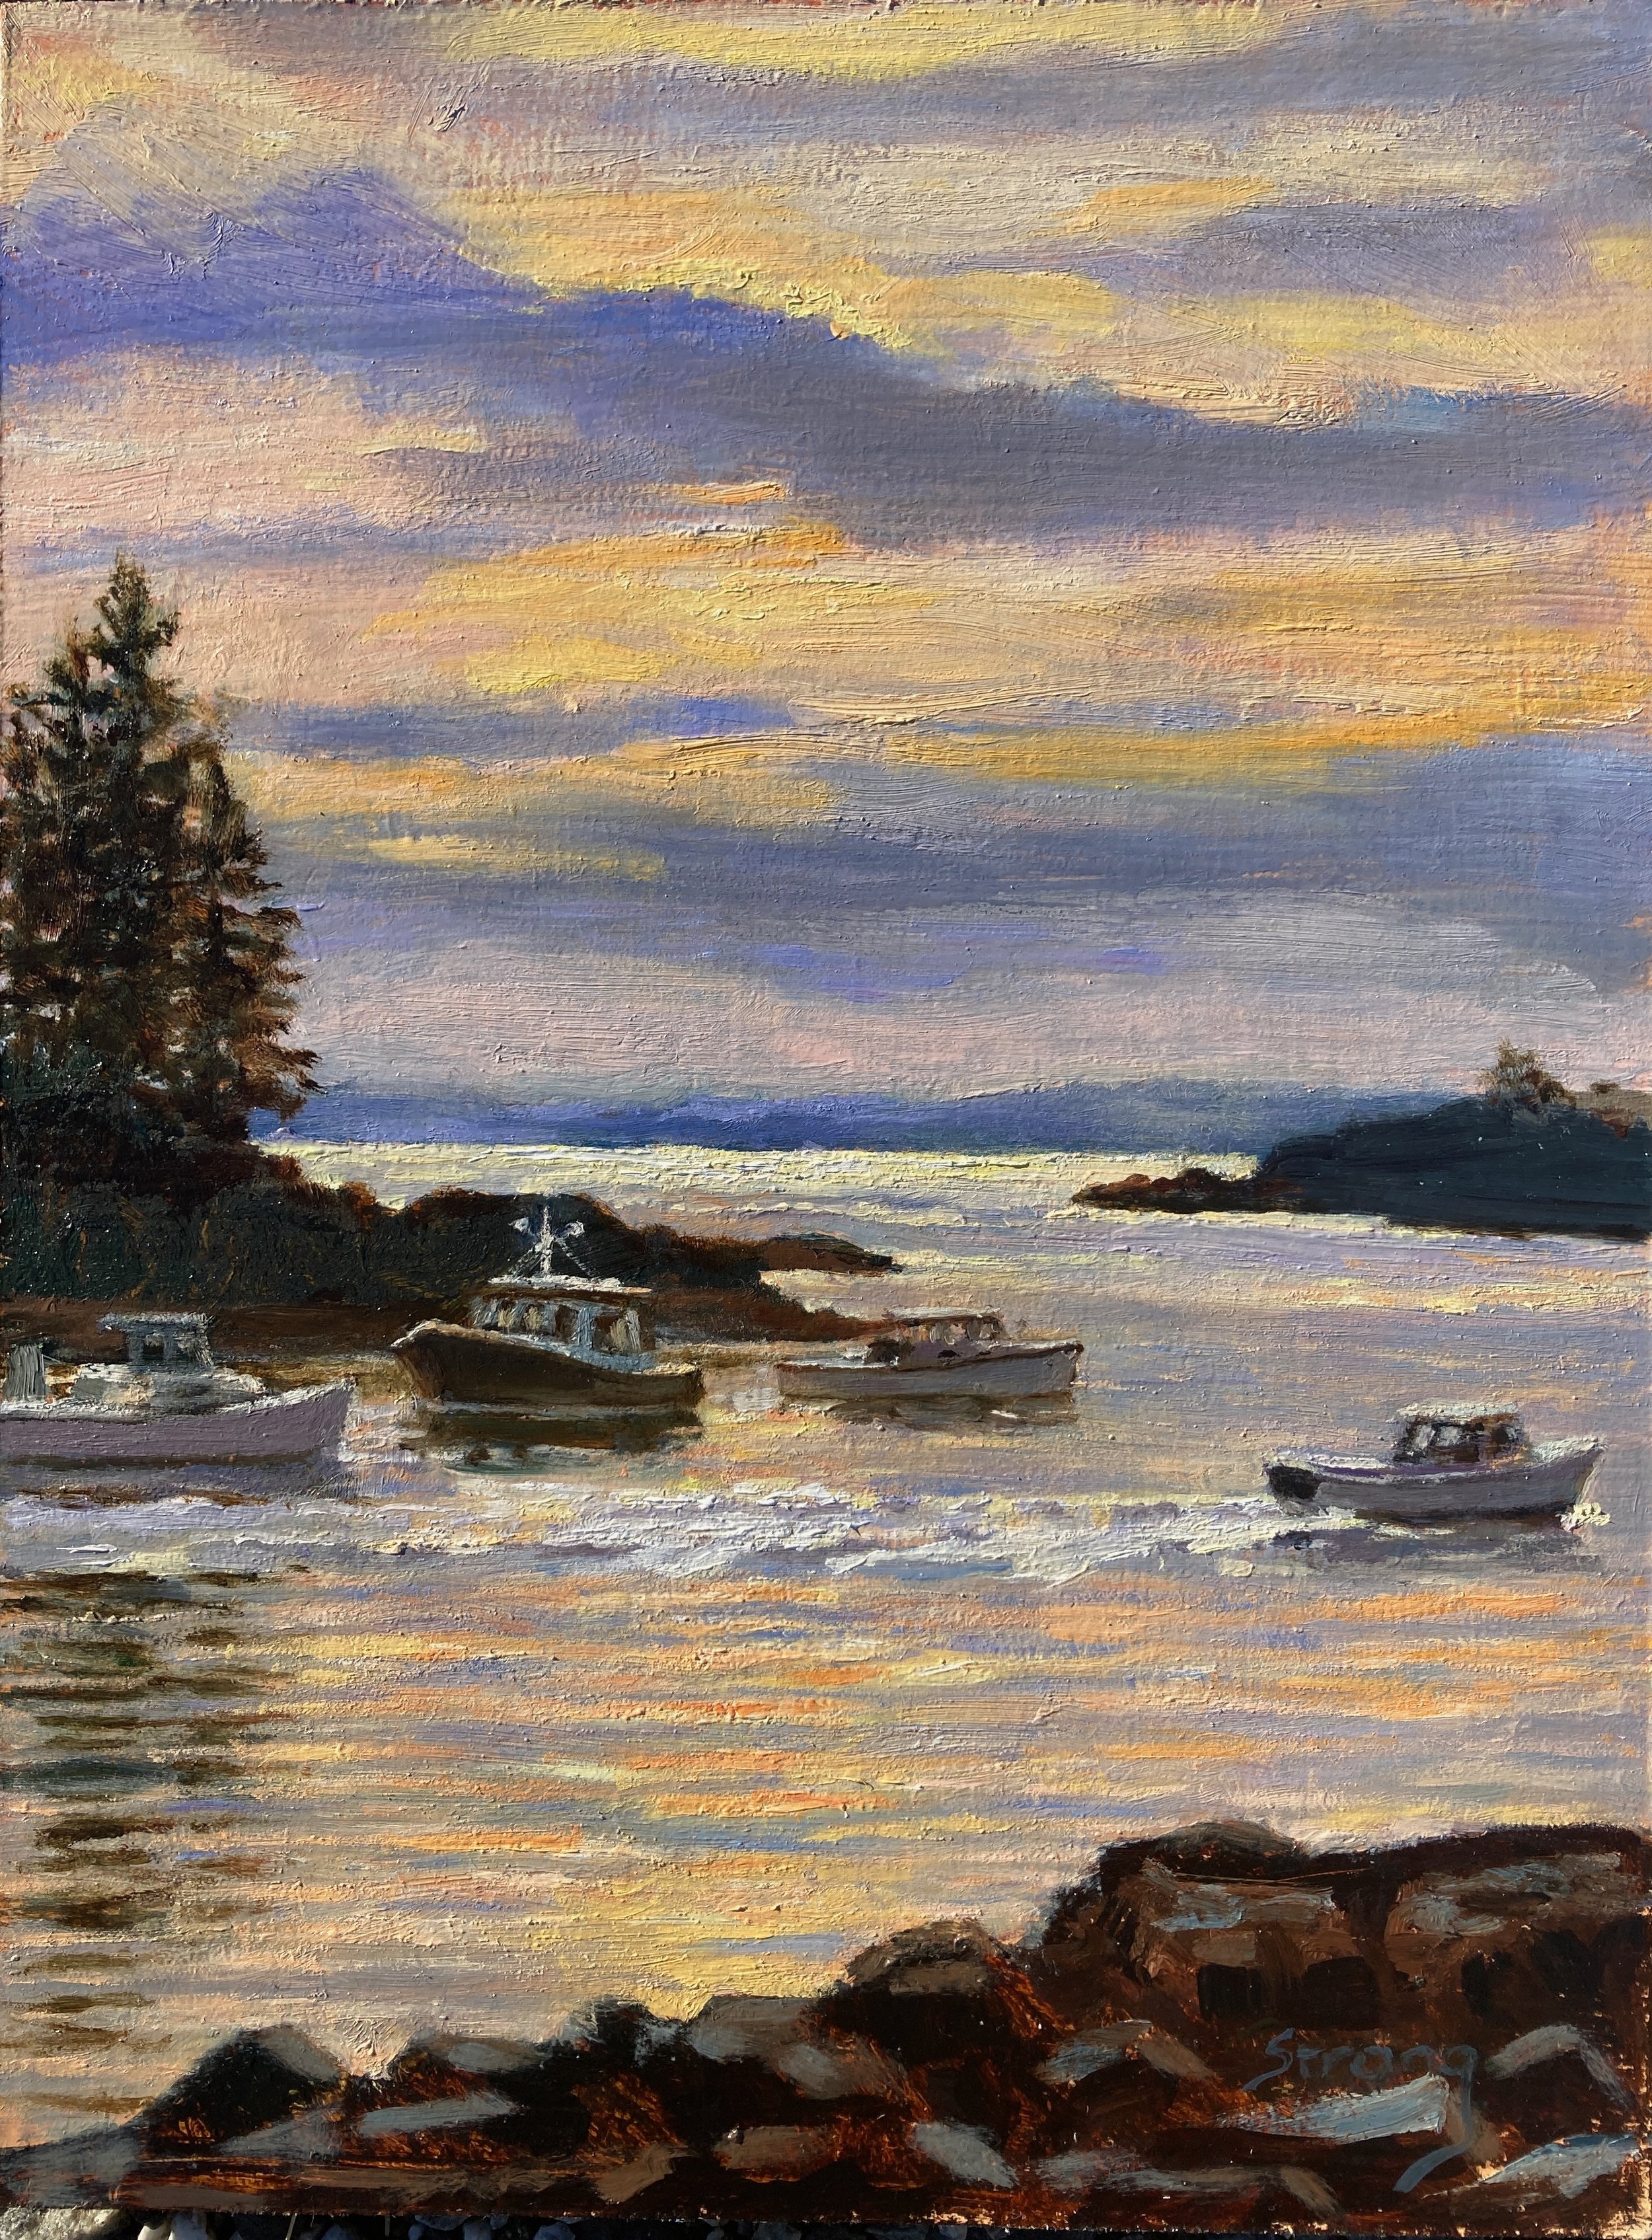 "Early Morning in Owls Head", 9" x 12", oil on panel